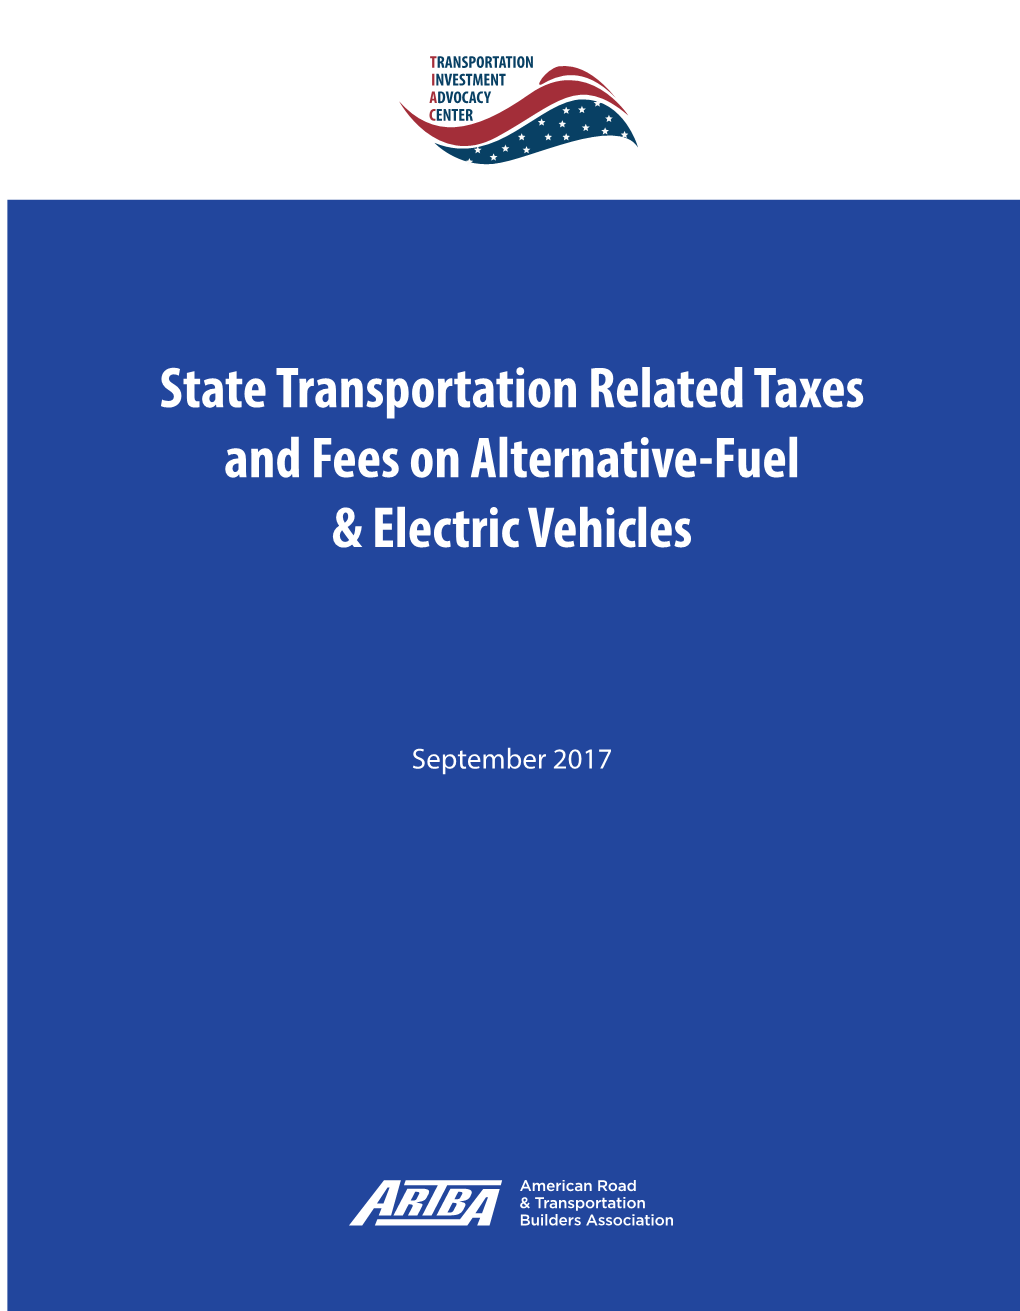 State Transportation Related Taxes and Fees on Alternative-Fuel & Electric Vehicles